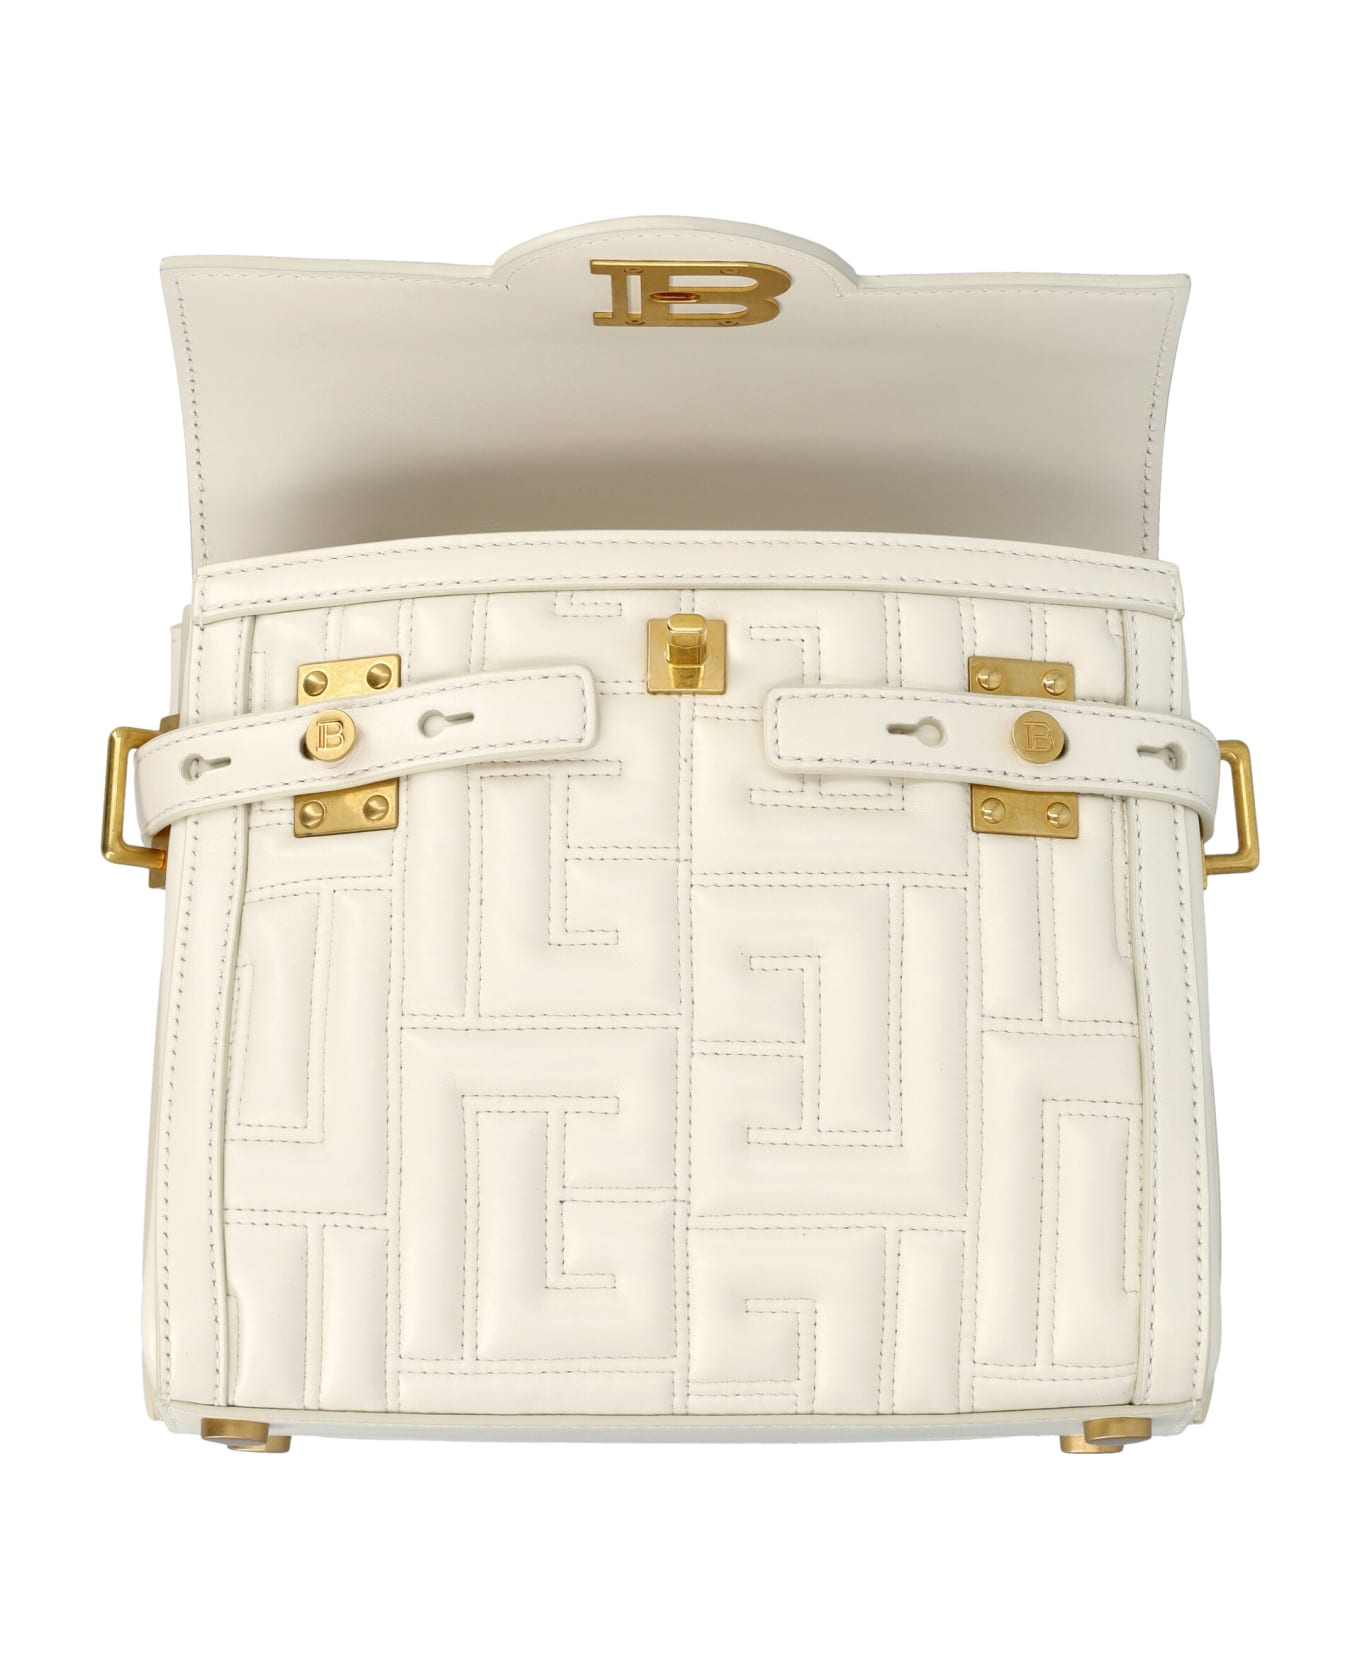 Balmain B-buzz 23 Quilted Leather Bag - WHITE